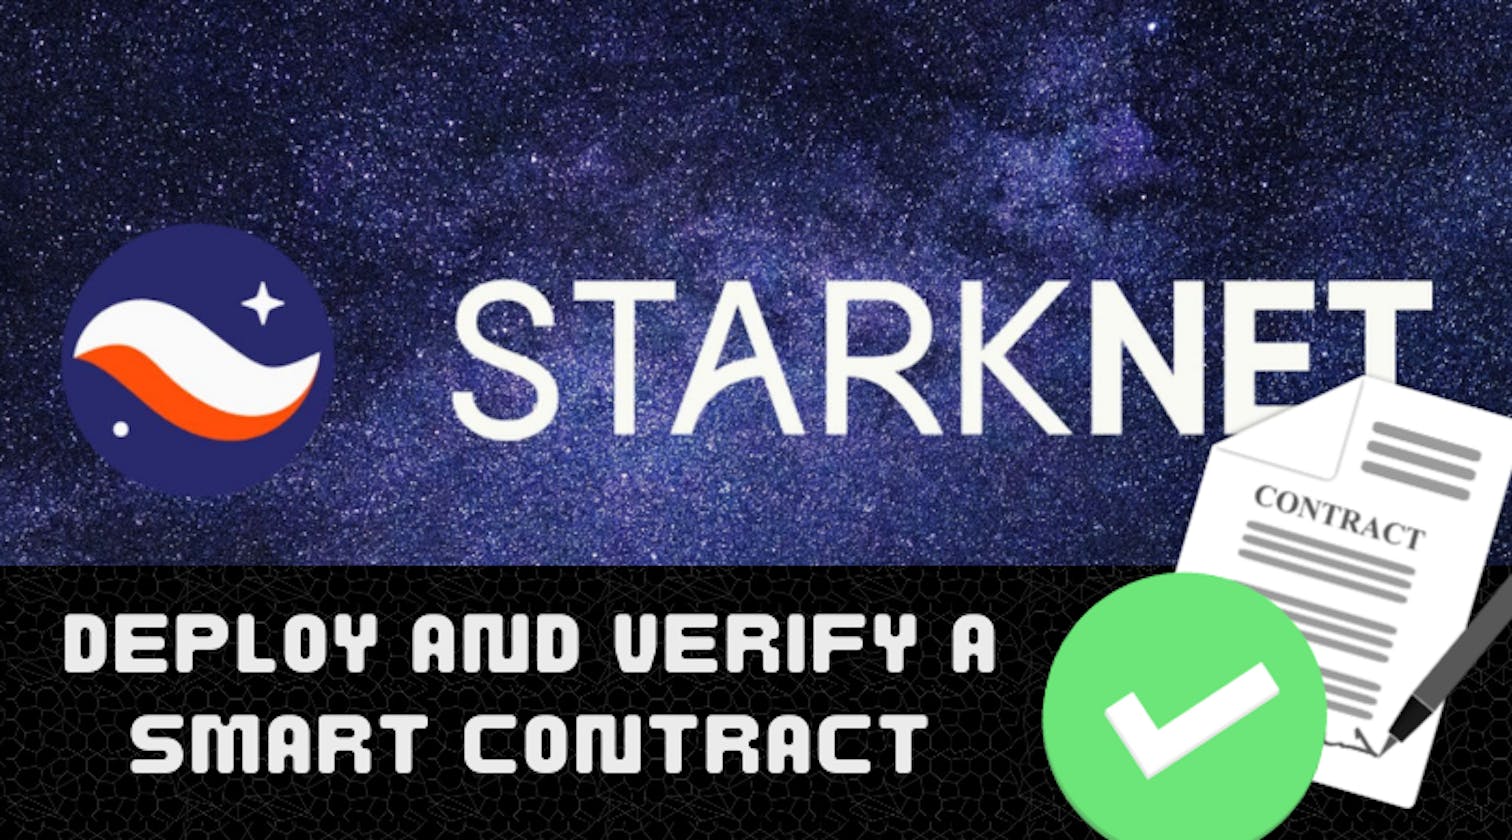 Deploy and verify a smart contract on StarkNet